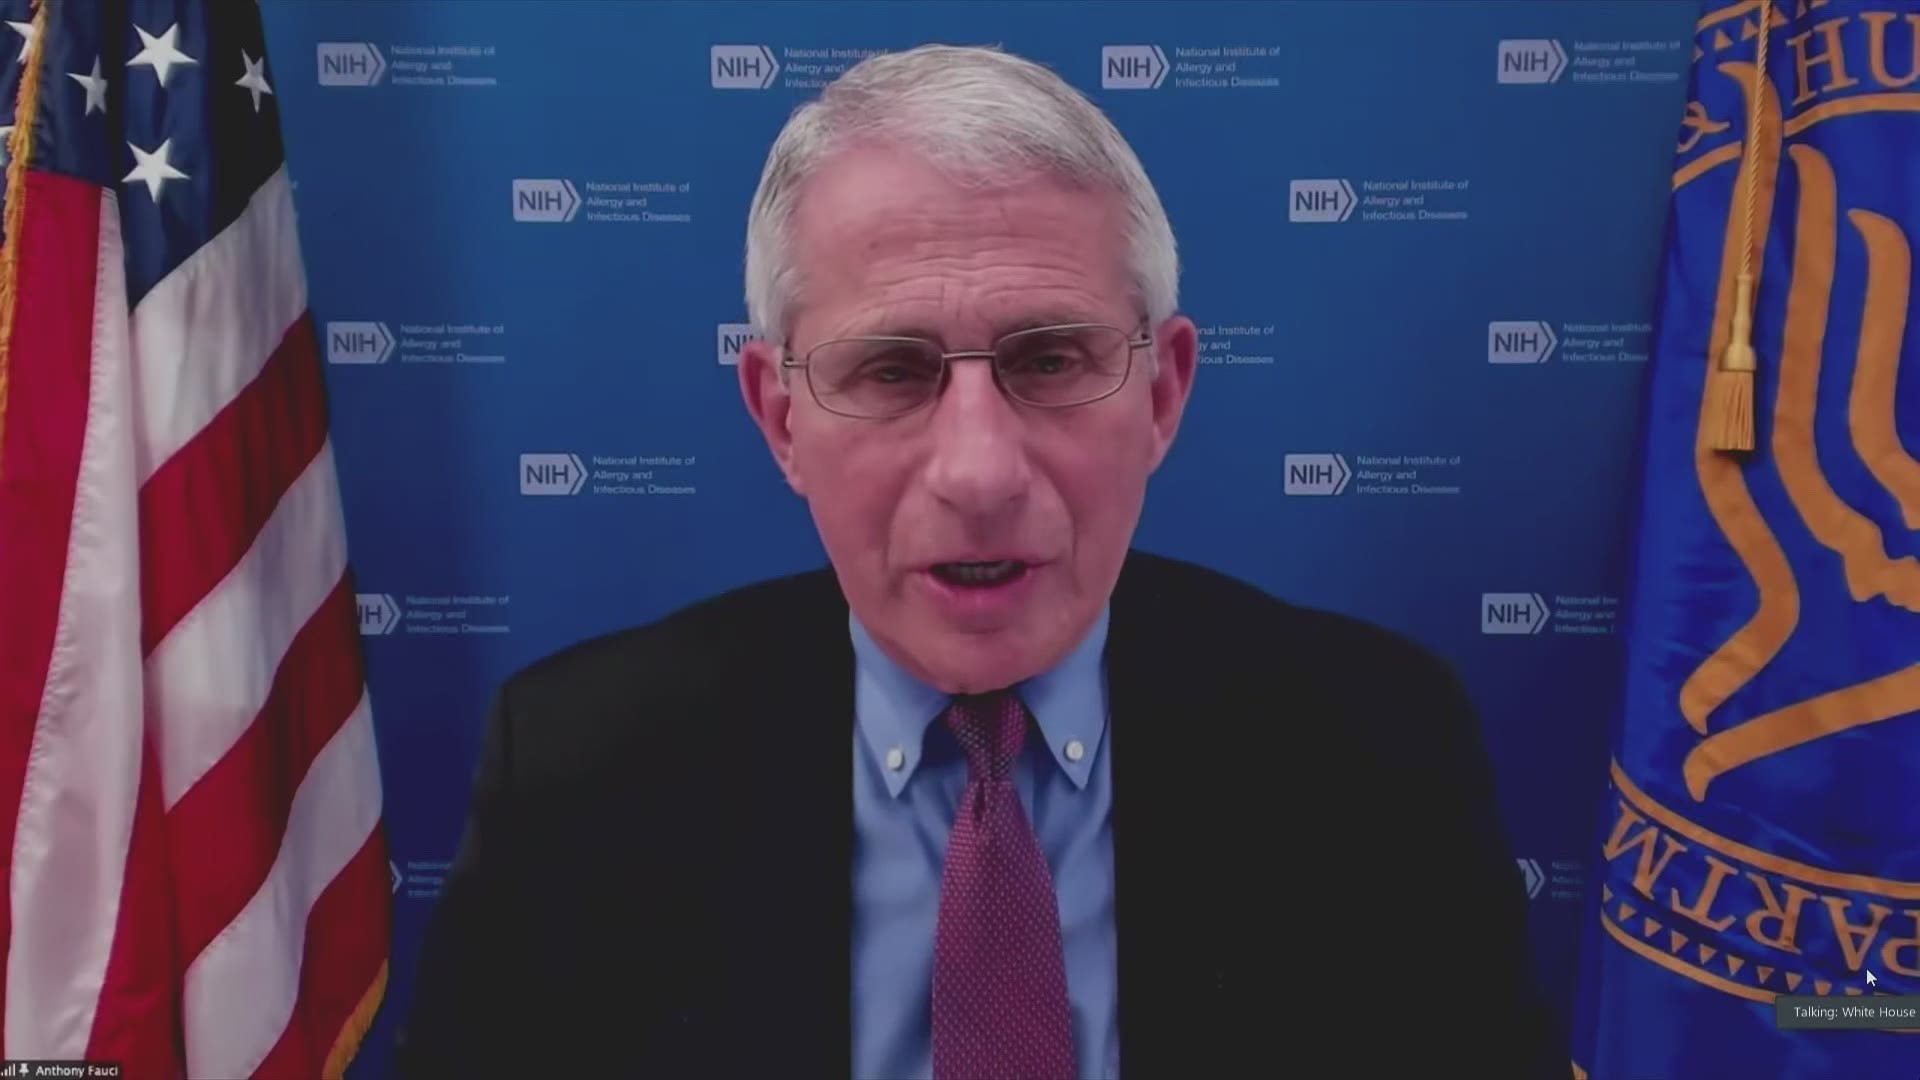 Dr. Anthony Fauci addresses the CDC and FDA decision to pause the Johnson & Johnson COVID-19 vaccines.